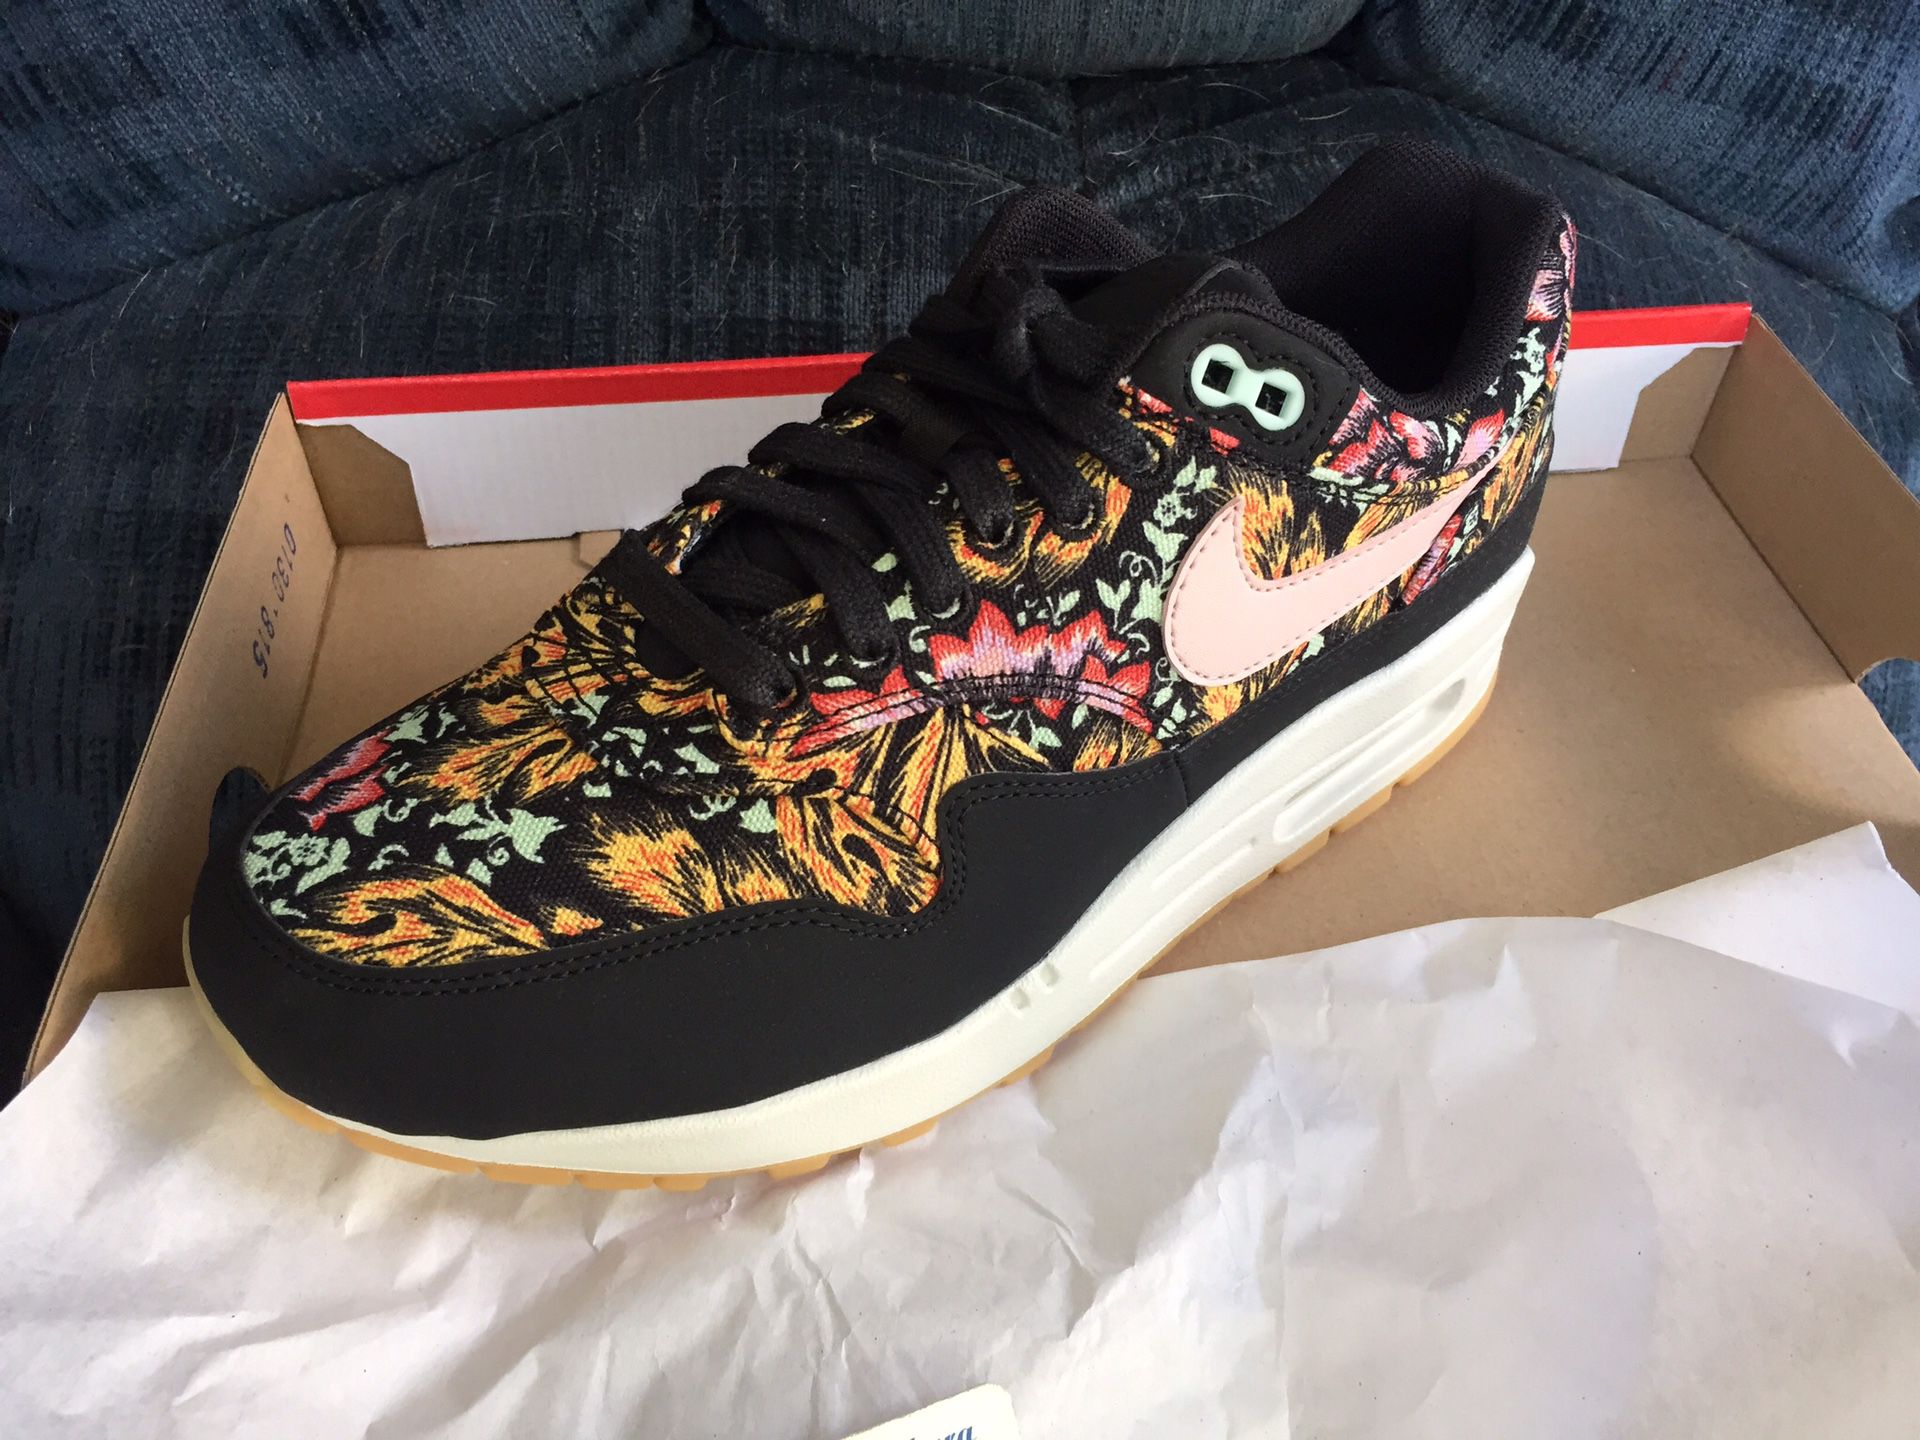 Nike Wmns Air Max 1 Spring Mix Sz 8 for Sale in San Ramon, CA - OfferUp